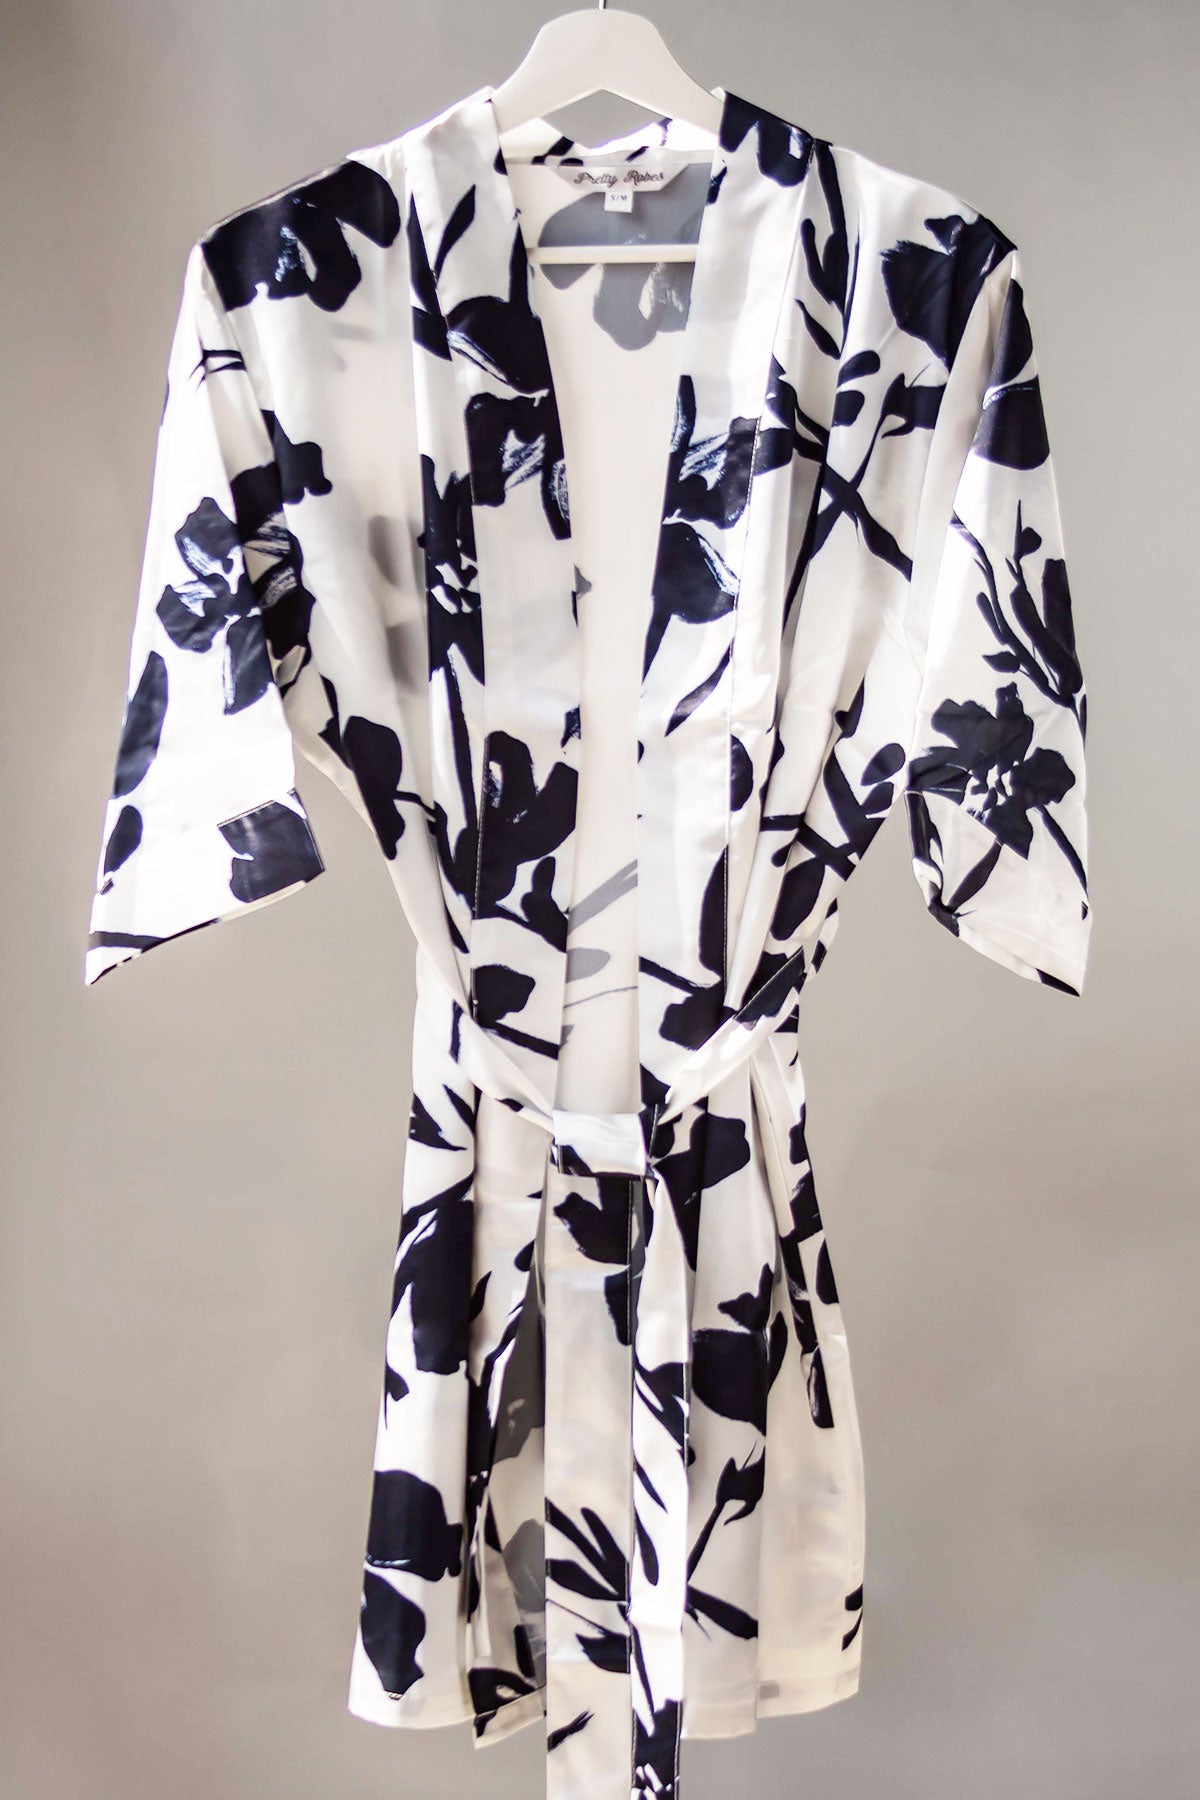 Floral White and Black Robe, Floral Satin Robe, Floral Bridesmaid Robe ...